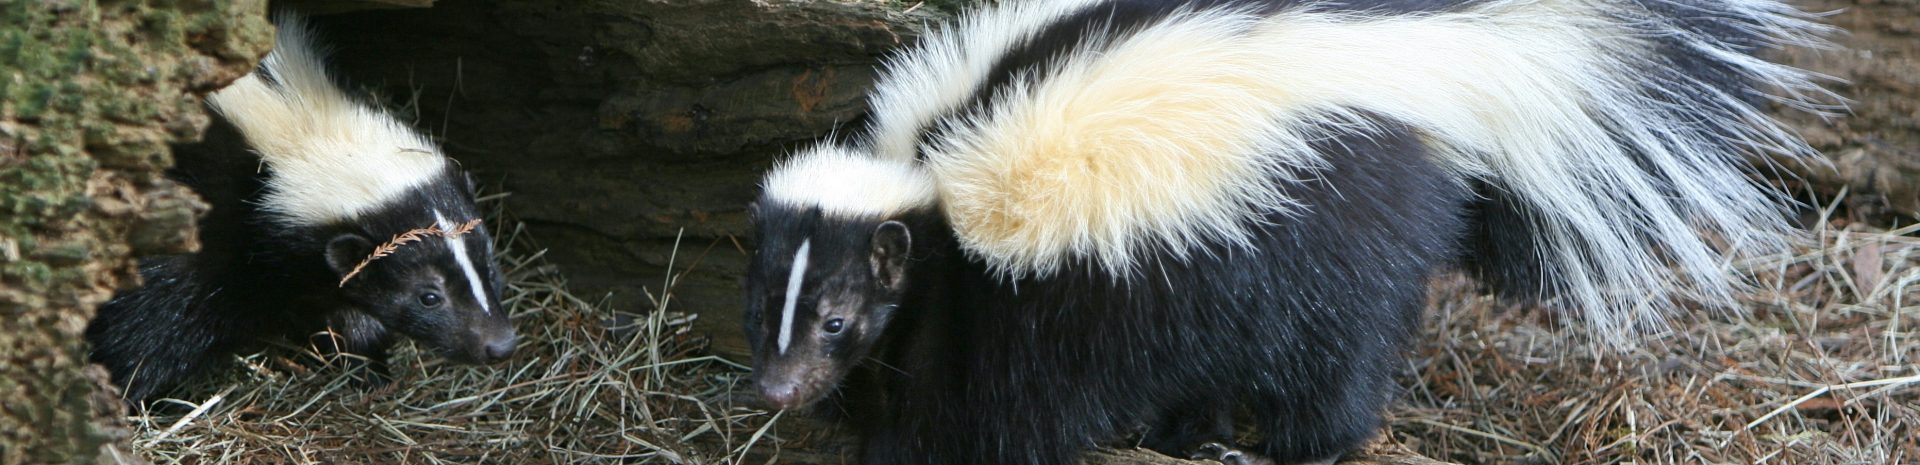 two skunks cropped